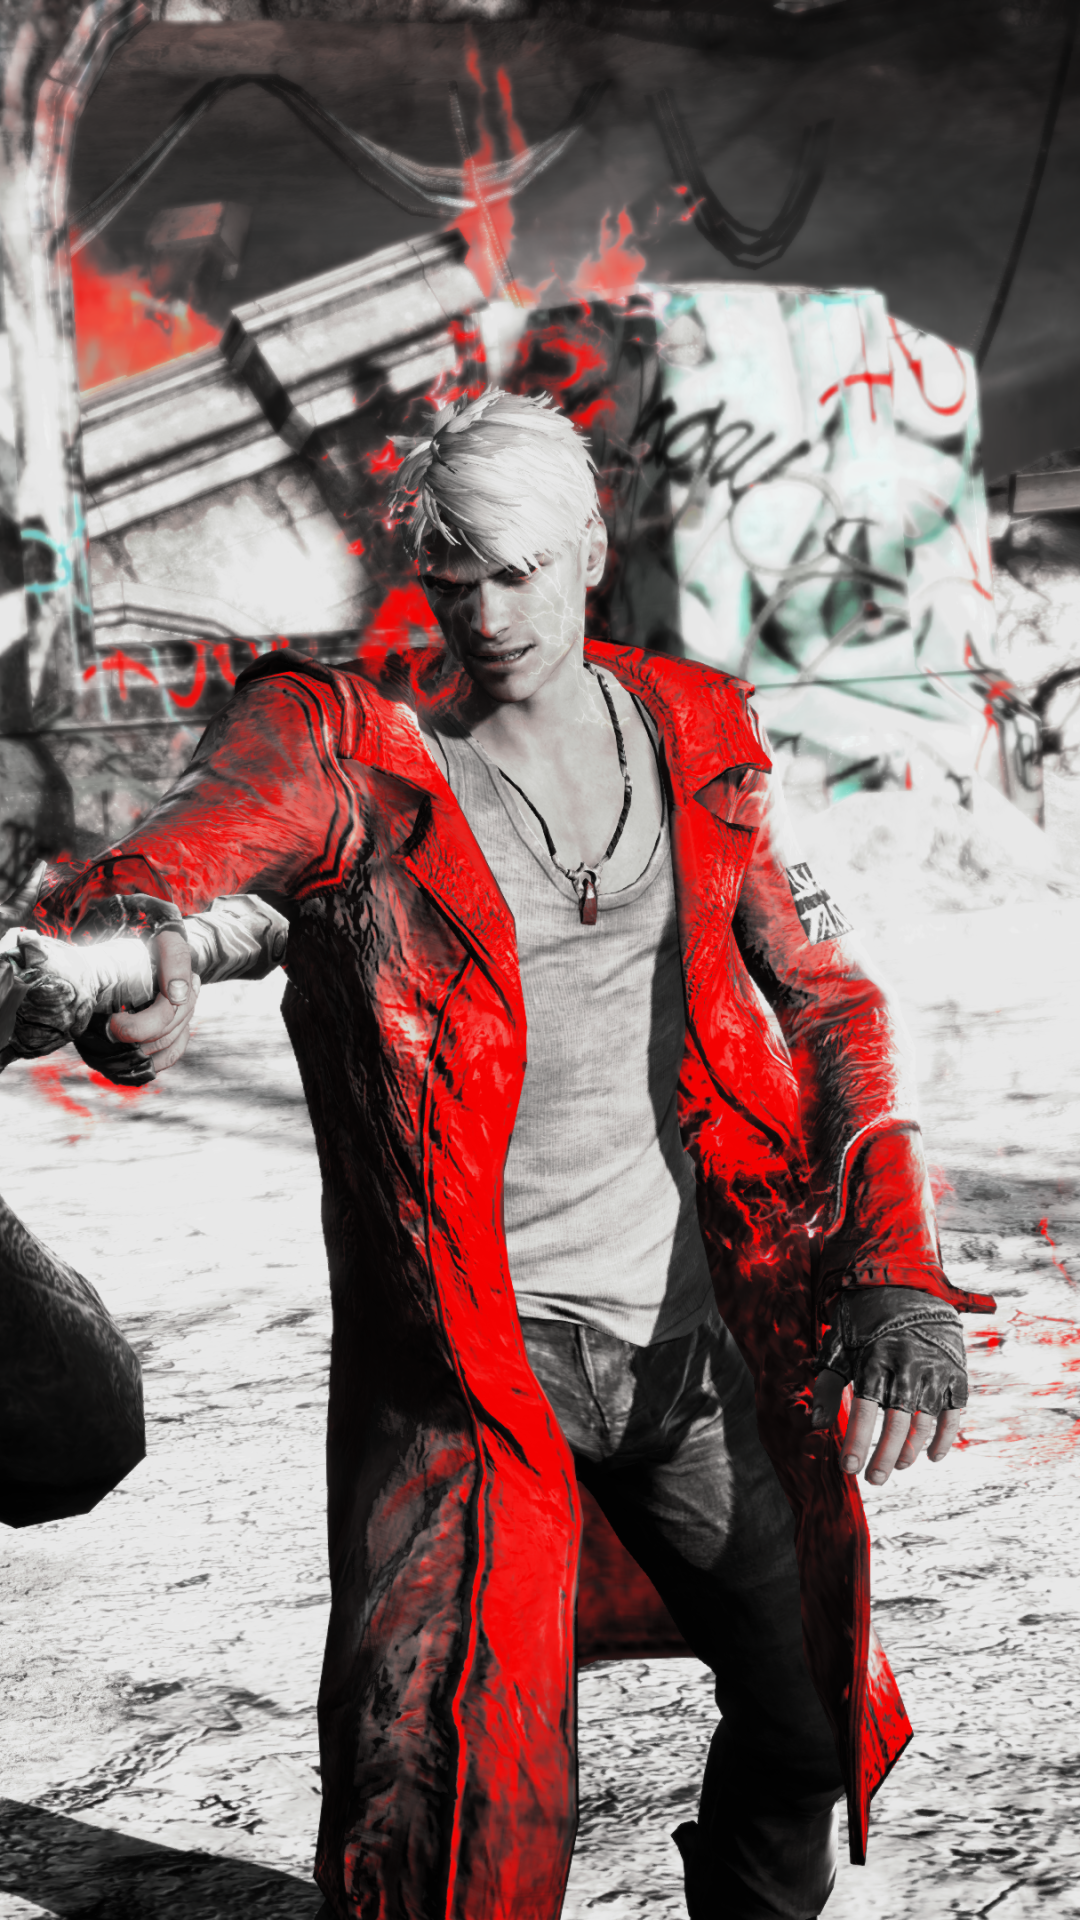 Devil May Cry Phone Wallpapers  Wallpaper Cave